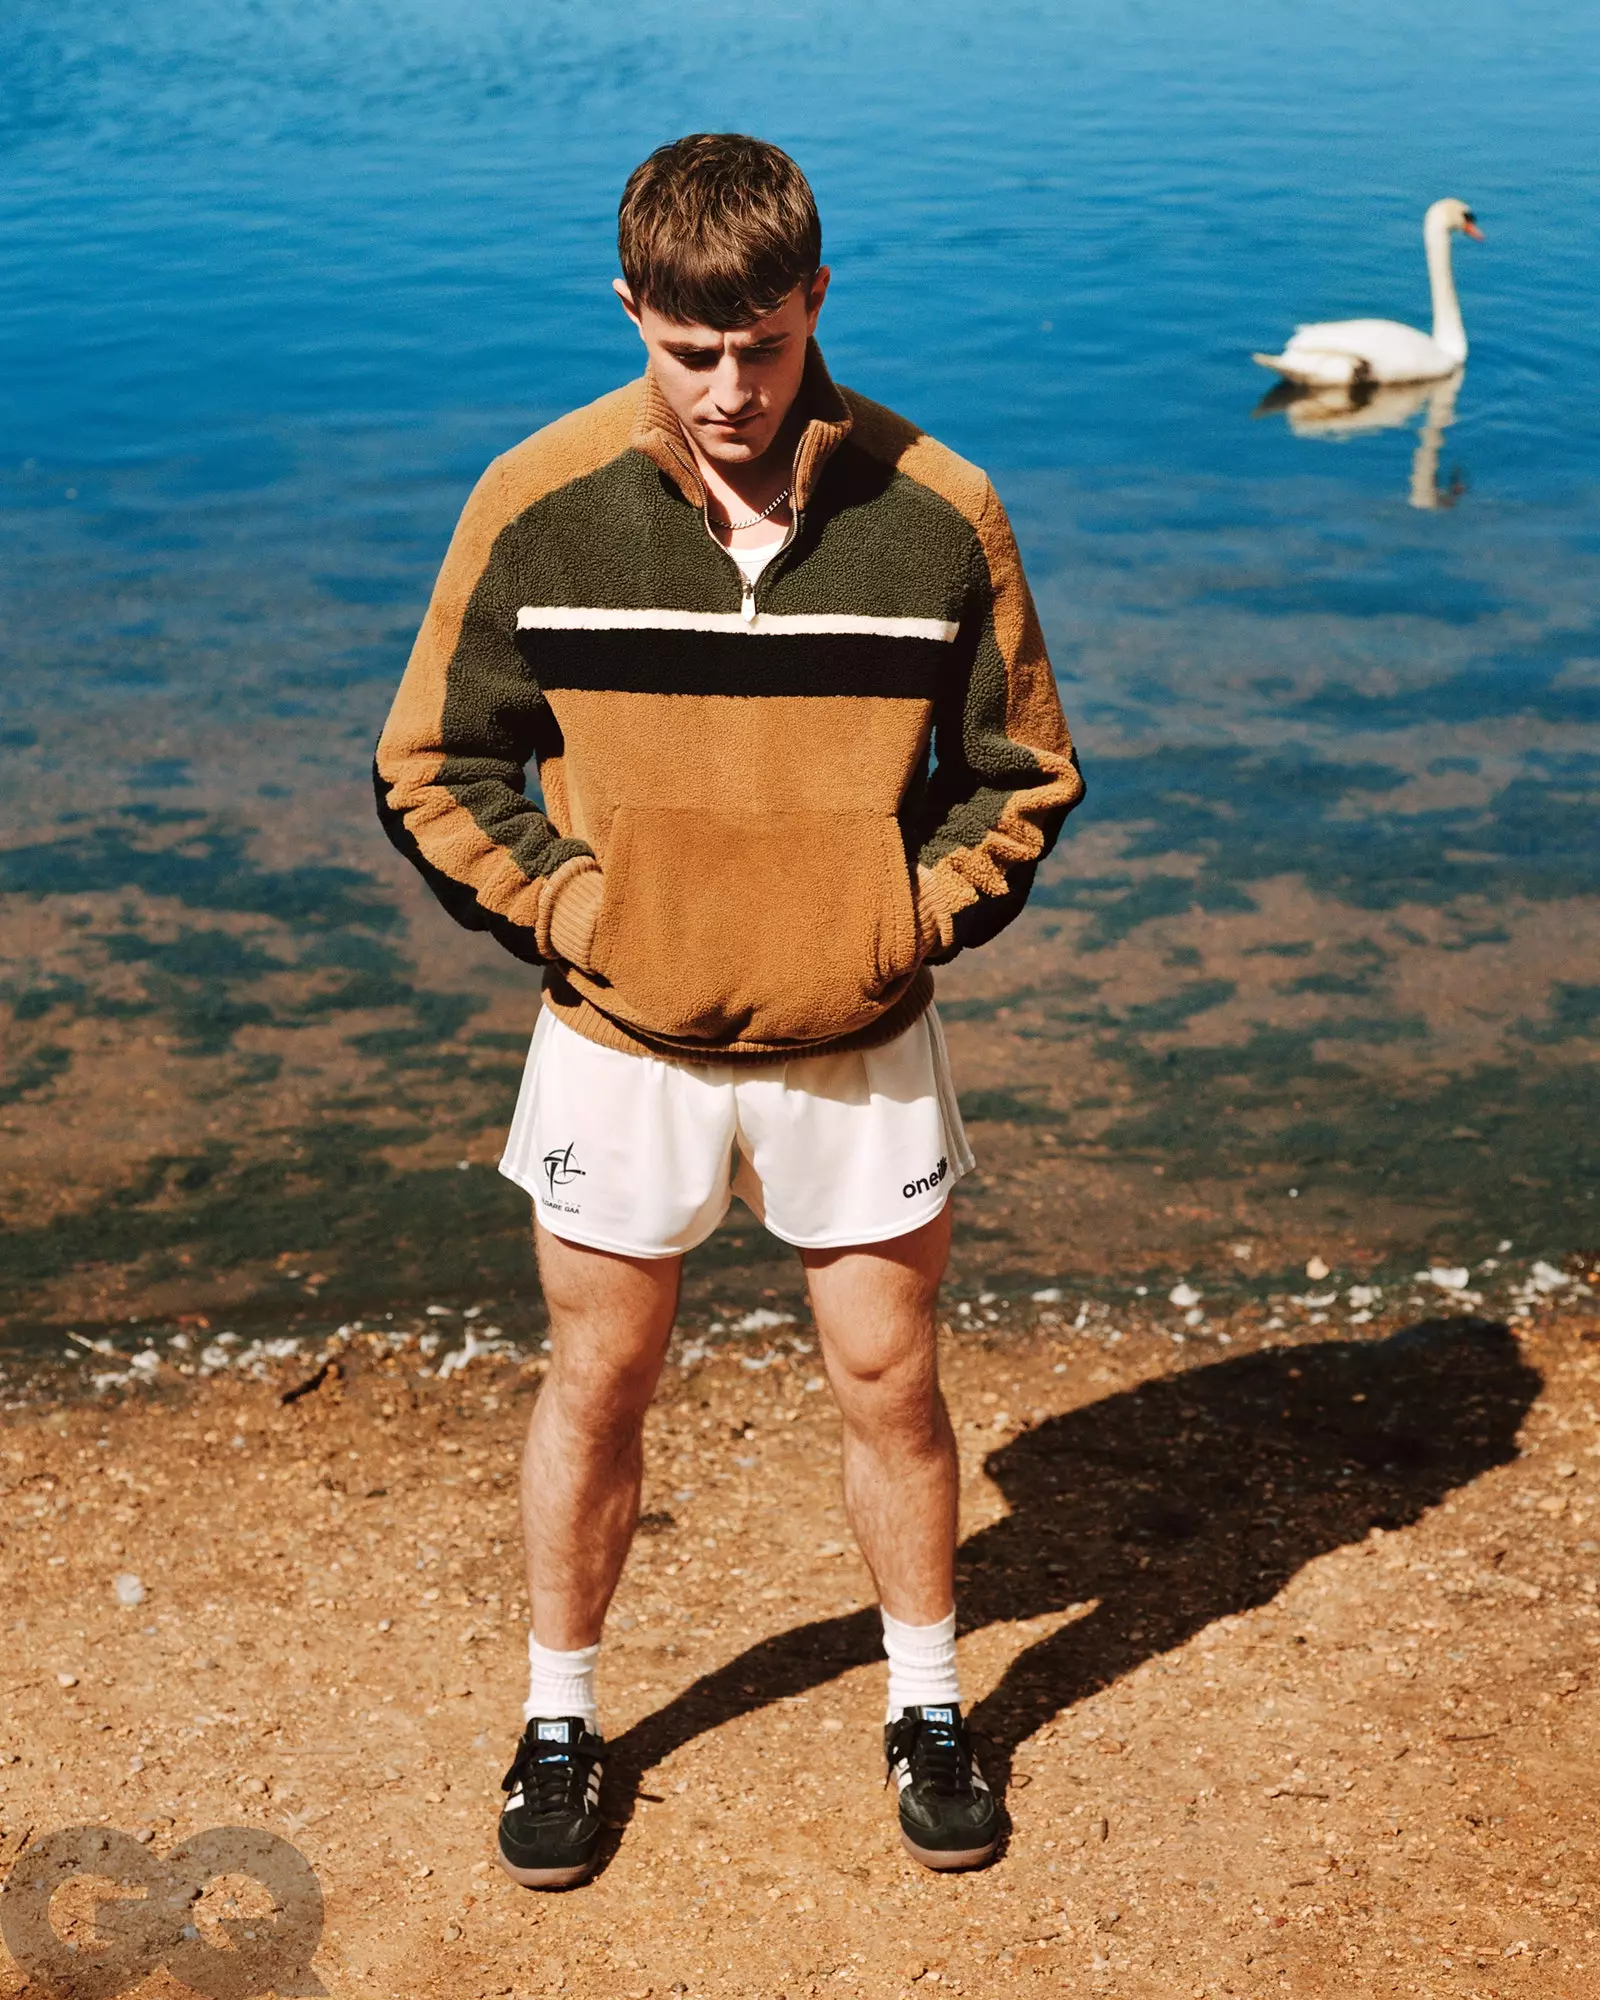 Paul Mescal Combines 10 Grand Designer Top with Kildare GAA Shorts in GQ Shoot